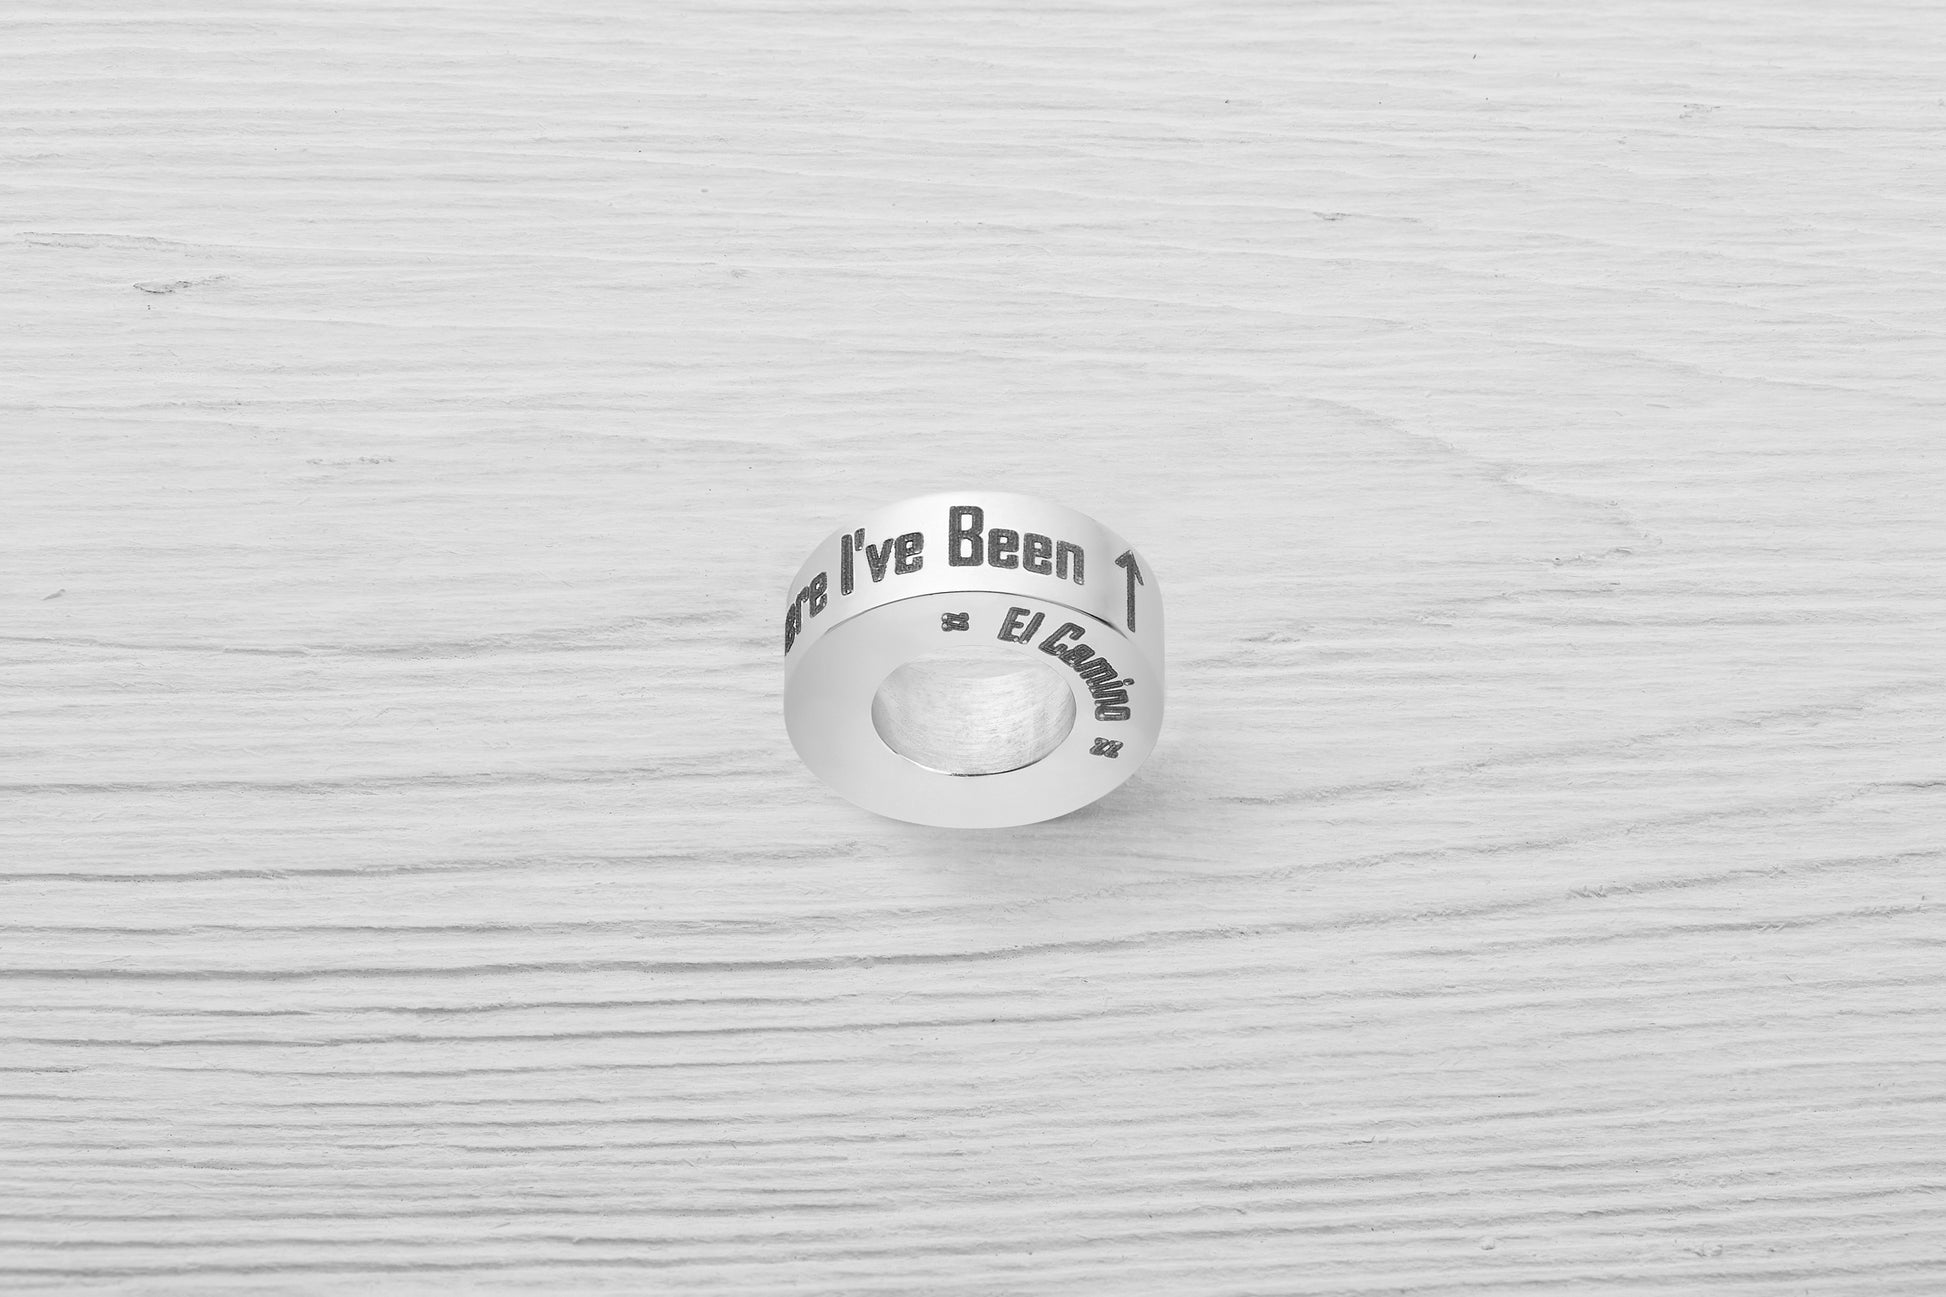 "Where I've Been" (Up Arrow) Divider Travel Charm Bead